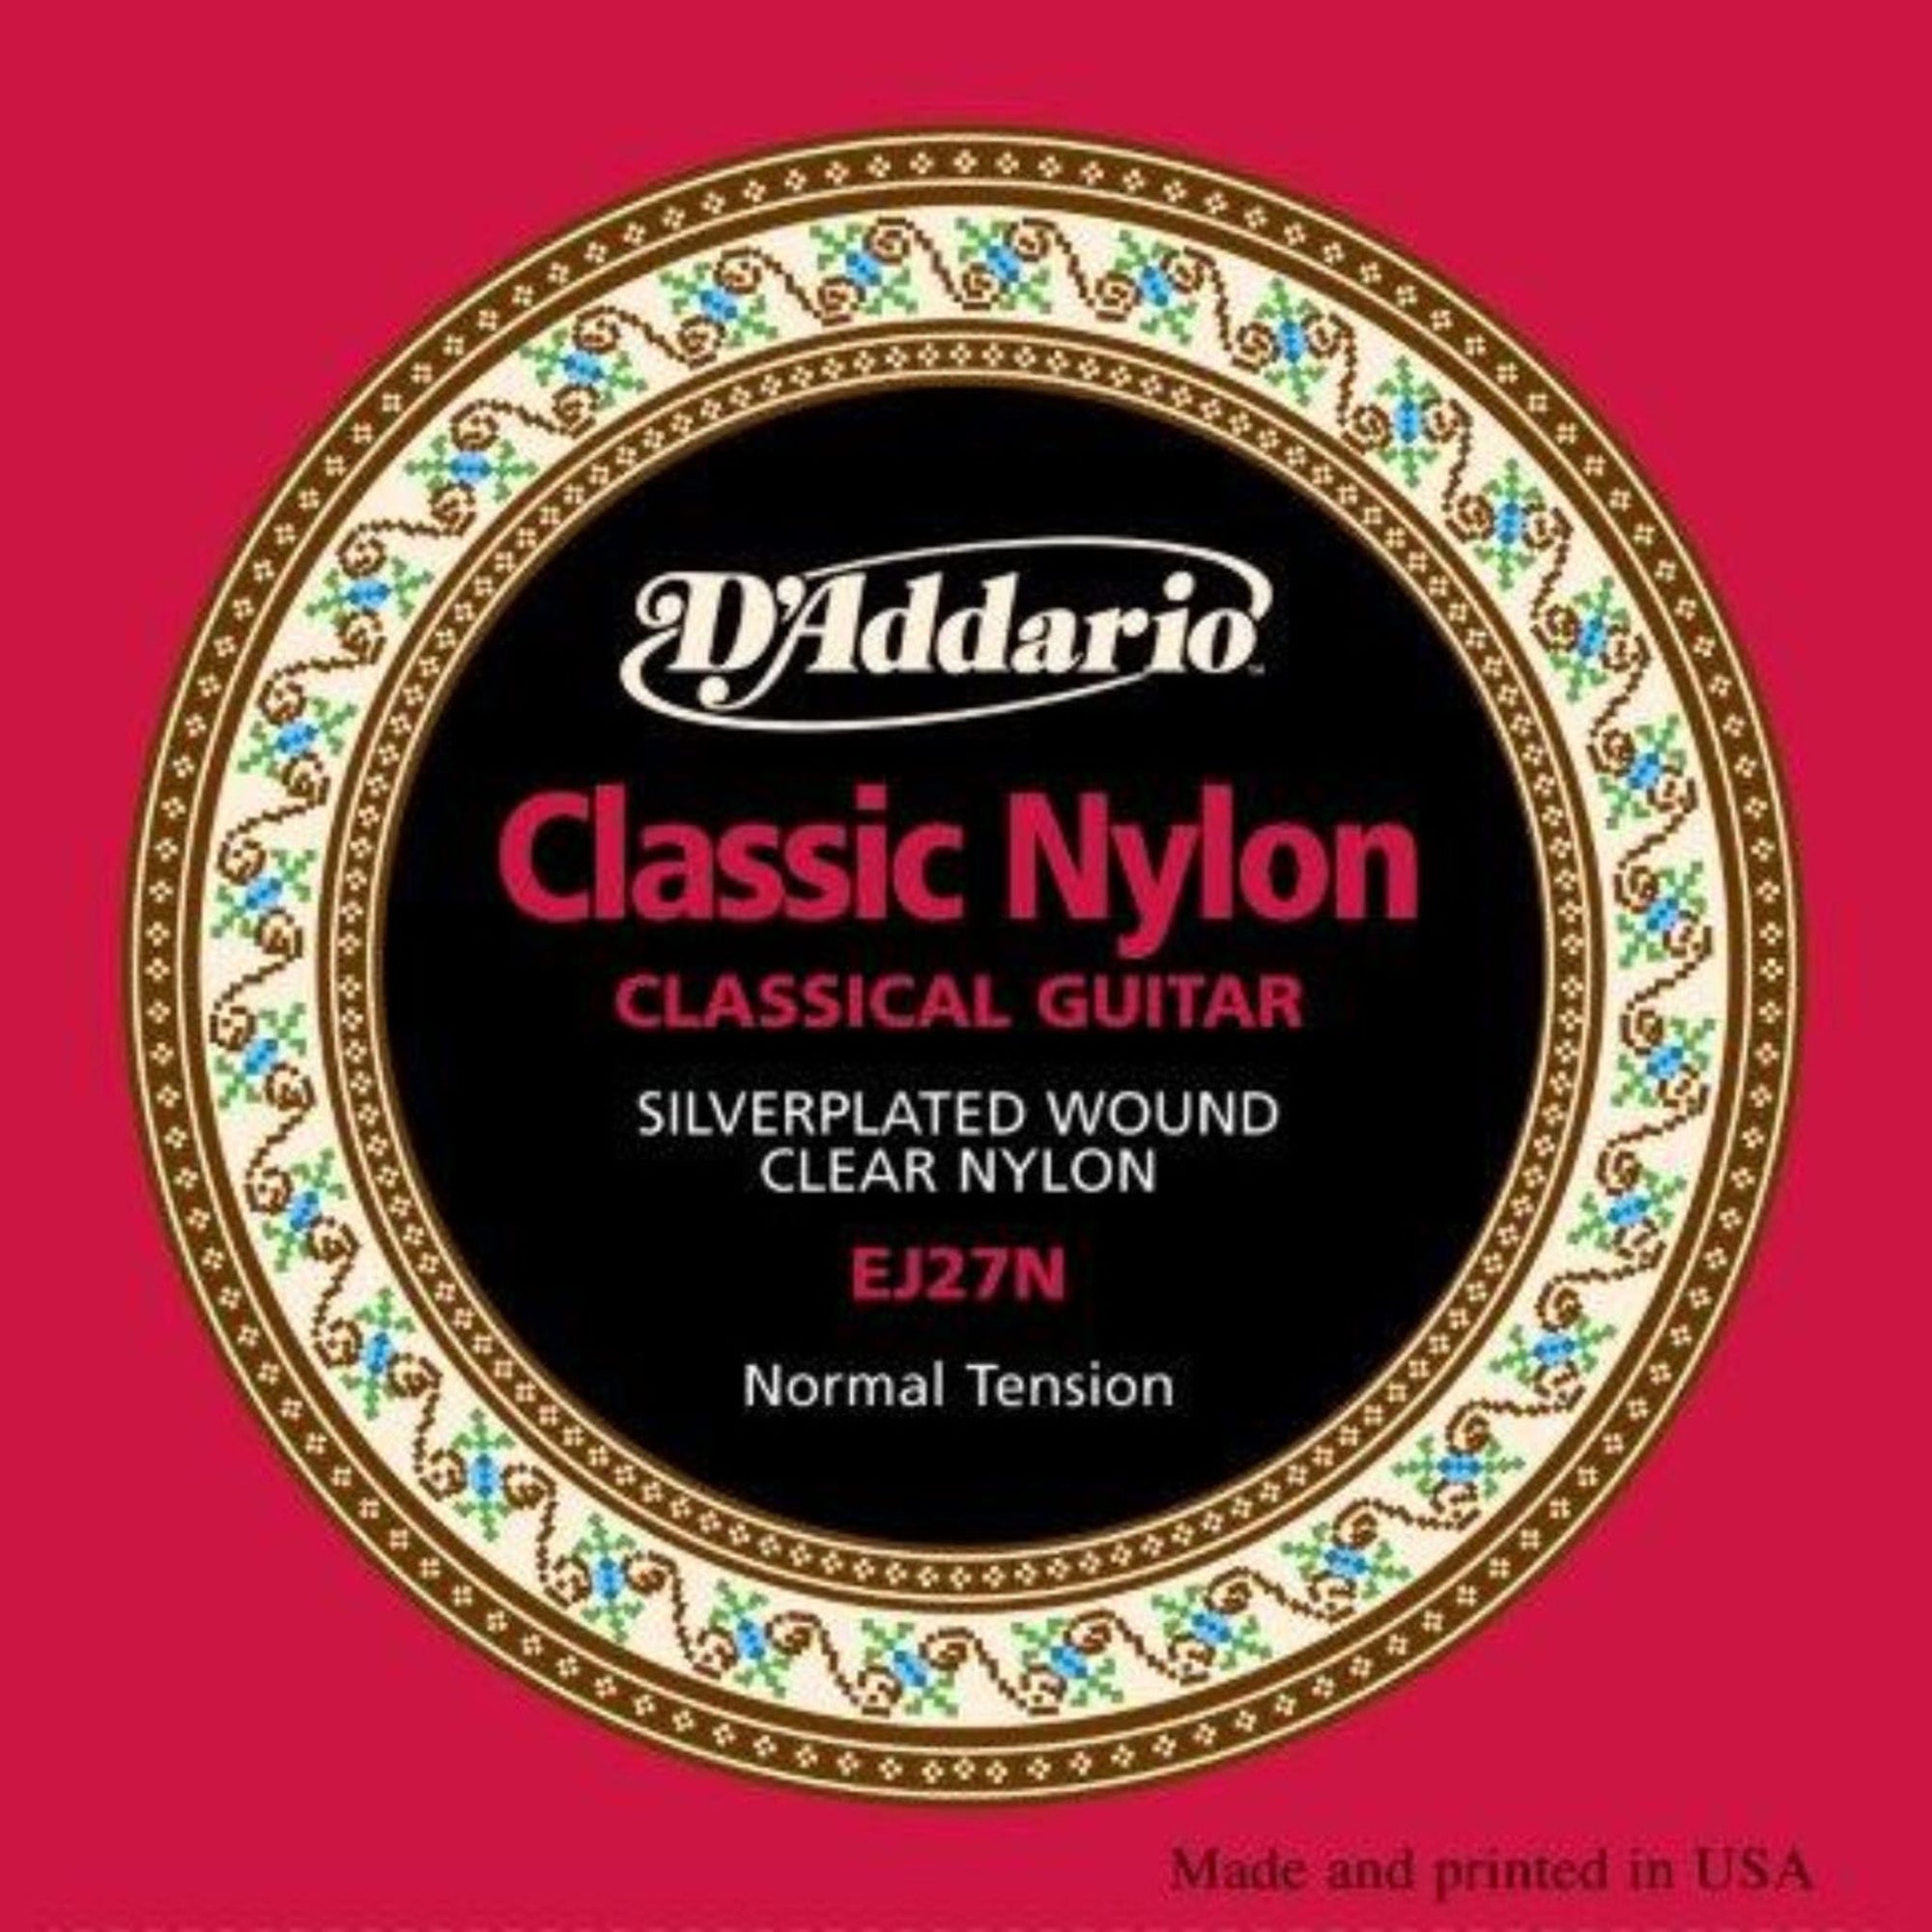 D'Addario EJ46 Classical Guitar String, hard tension, is a popular choice for its rich tone, increased resistance and strong projection.